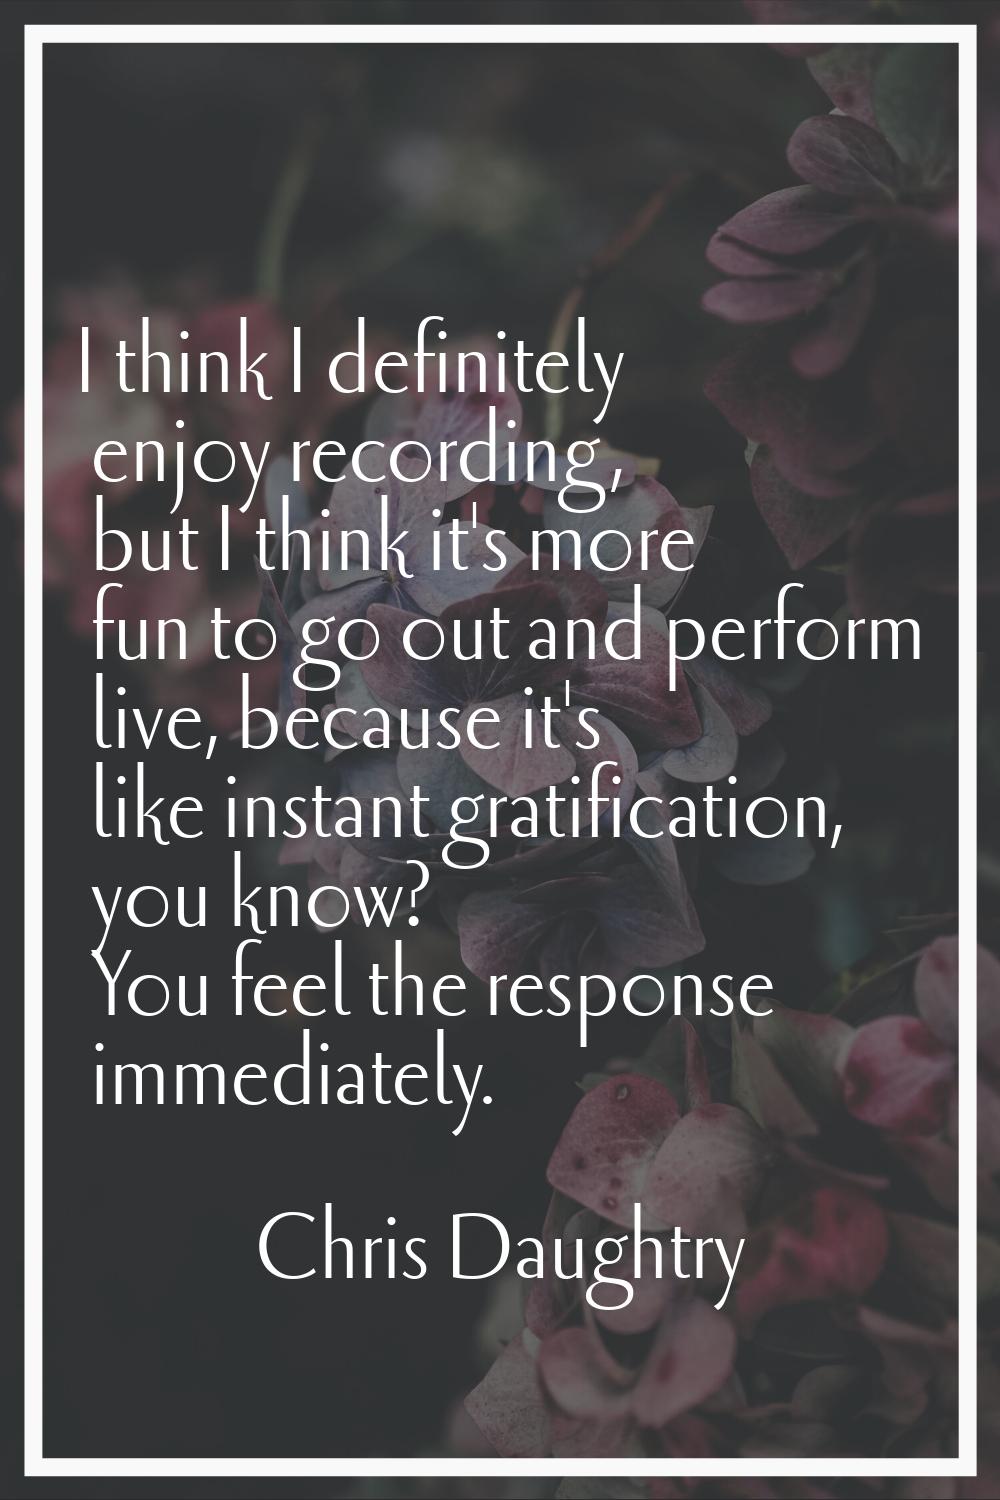 I think I definitely enjoy recording, but I think it's more fun to go out and perform live, because